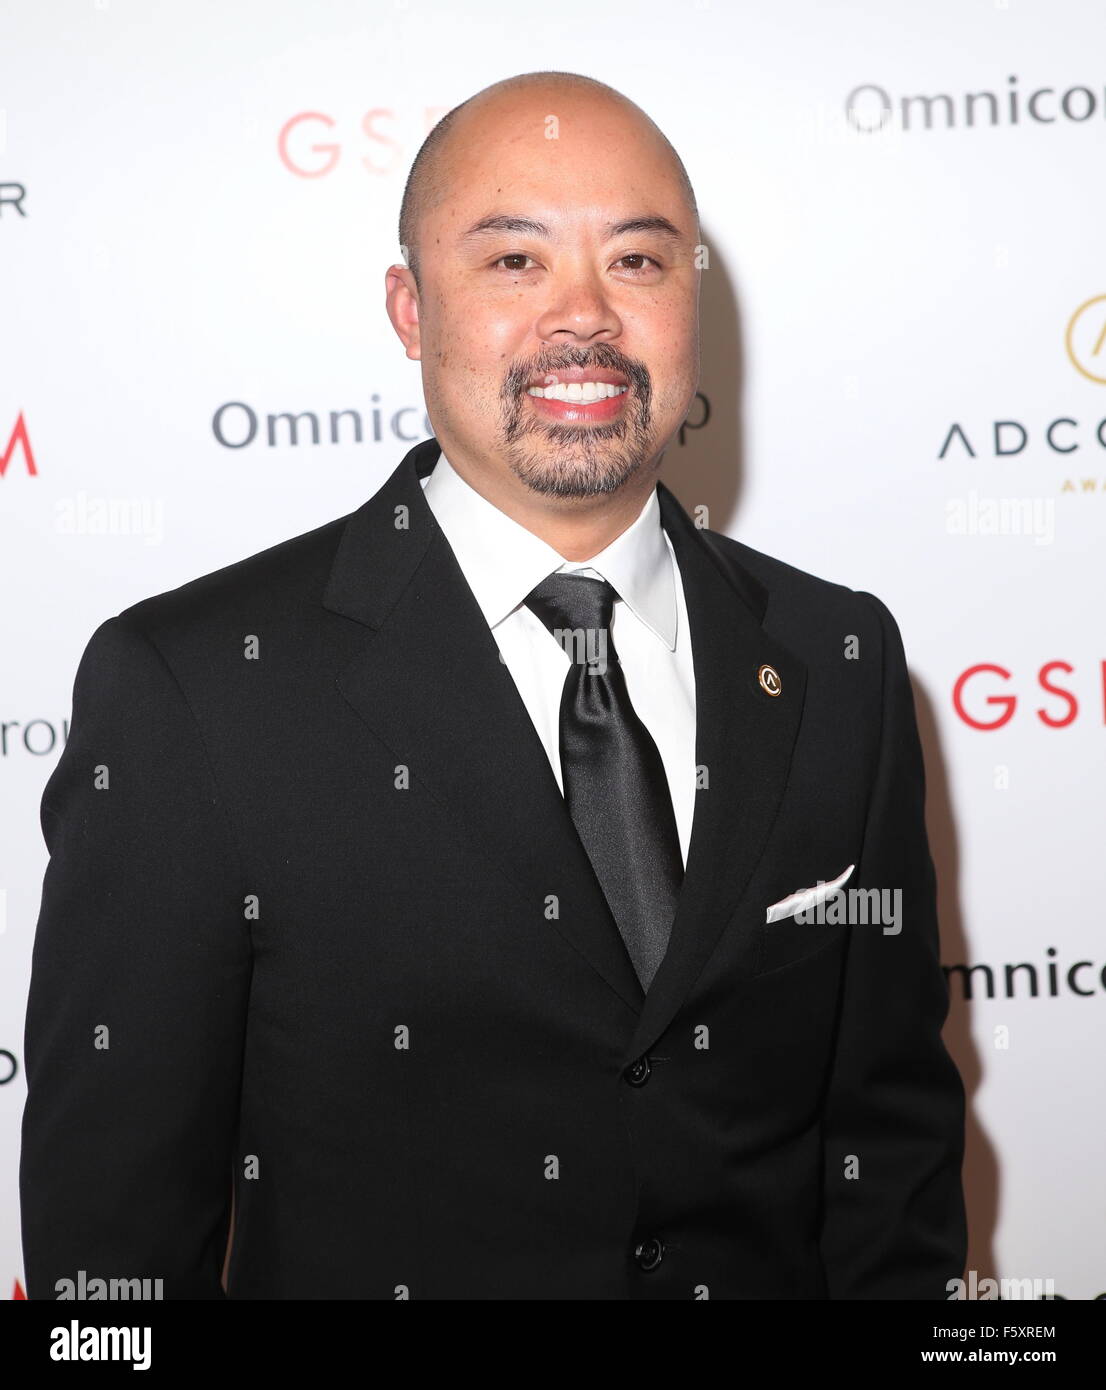 The 9th Annual ADCOLOR Awards held at Pier Sixty Featuring: Will Chau ...